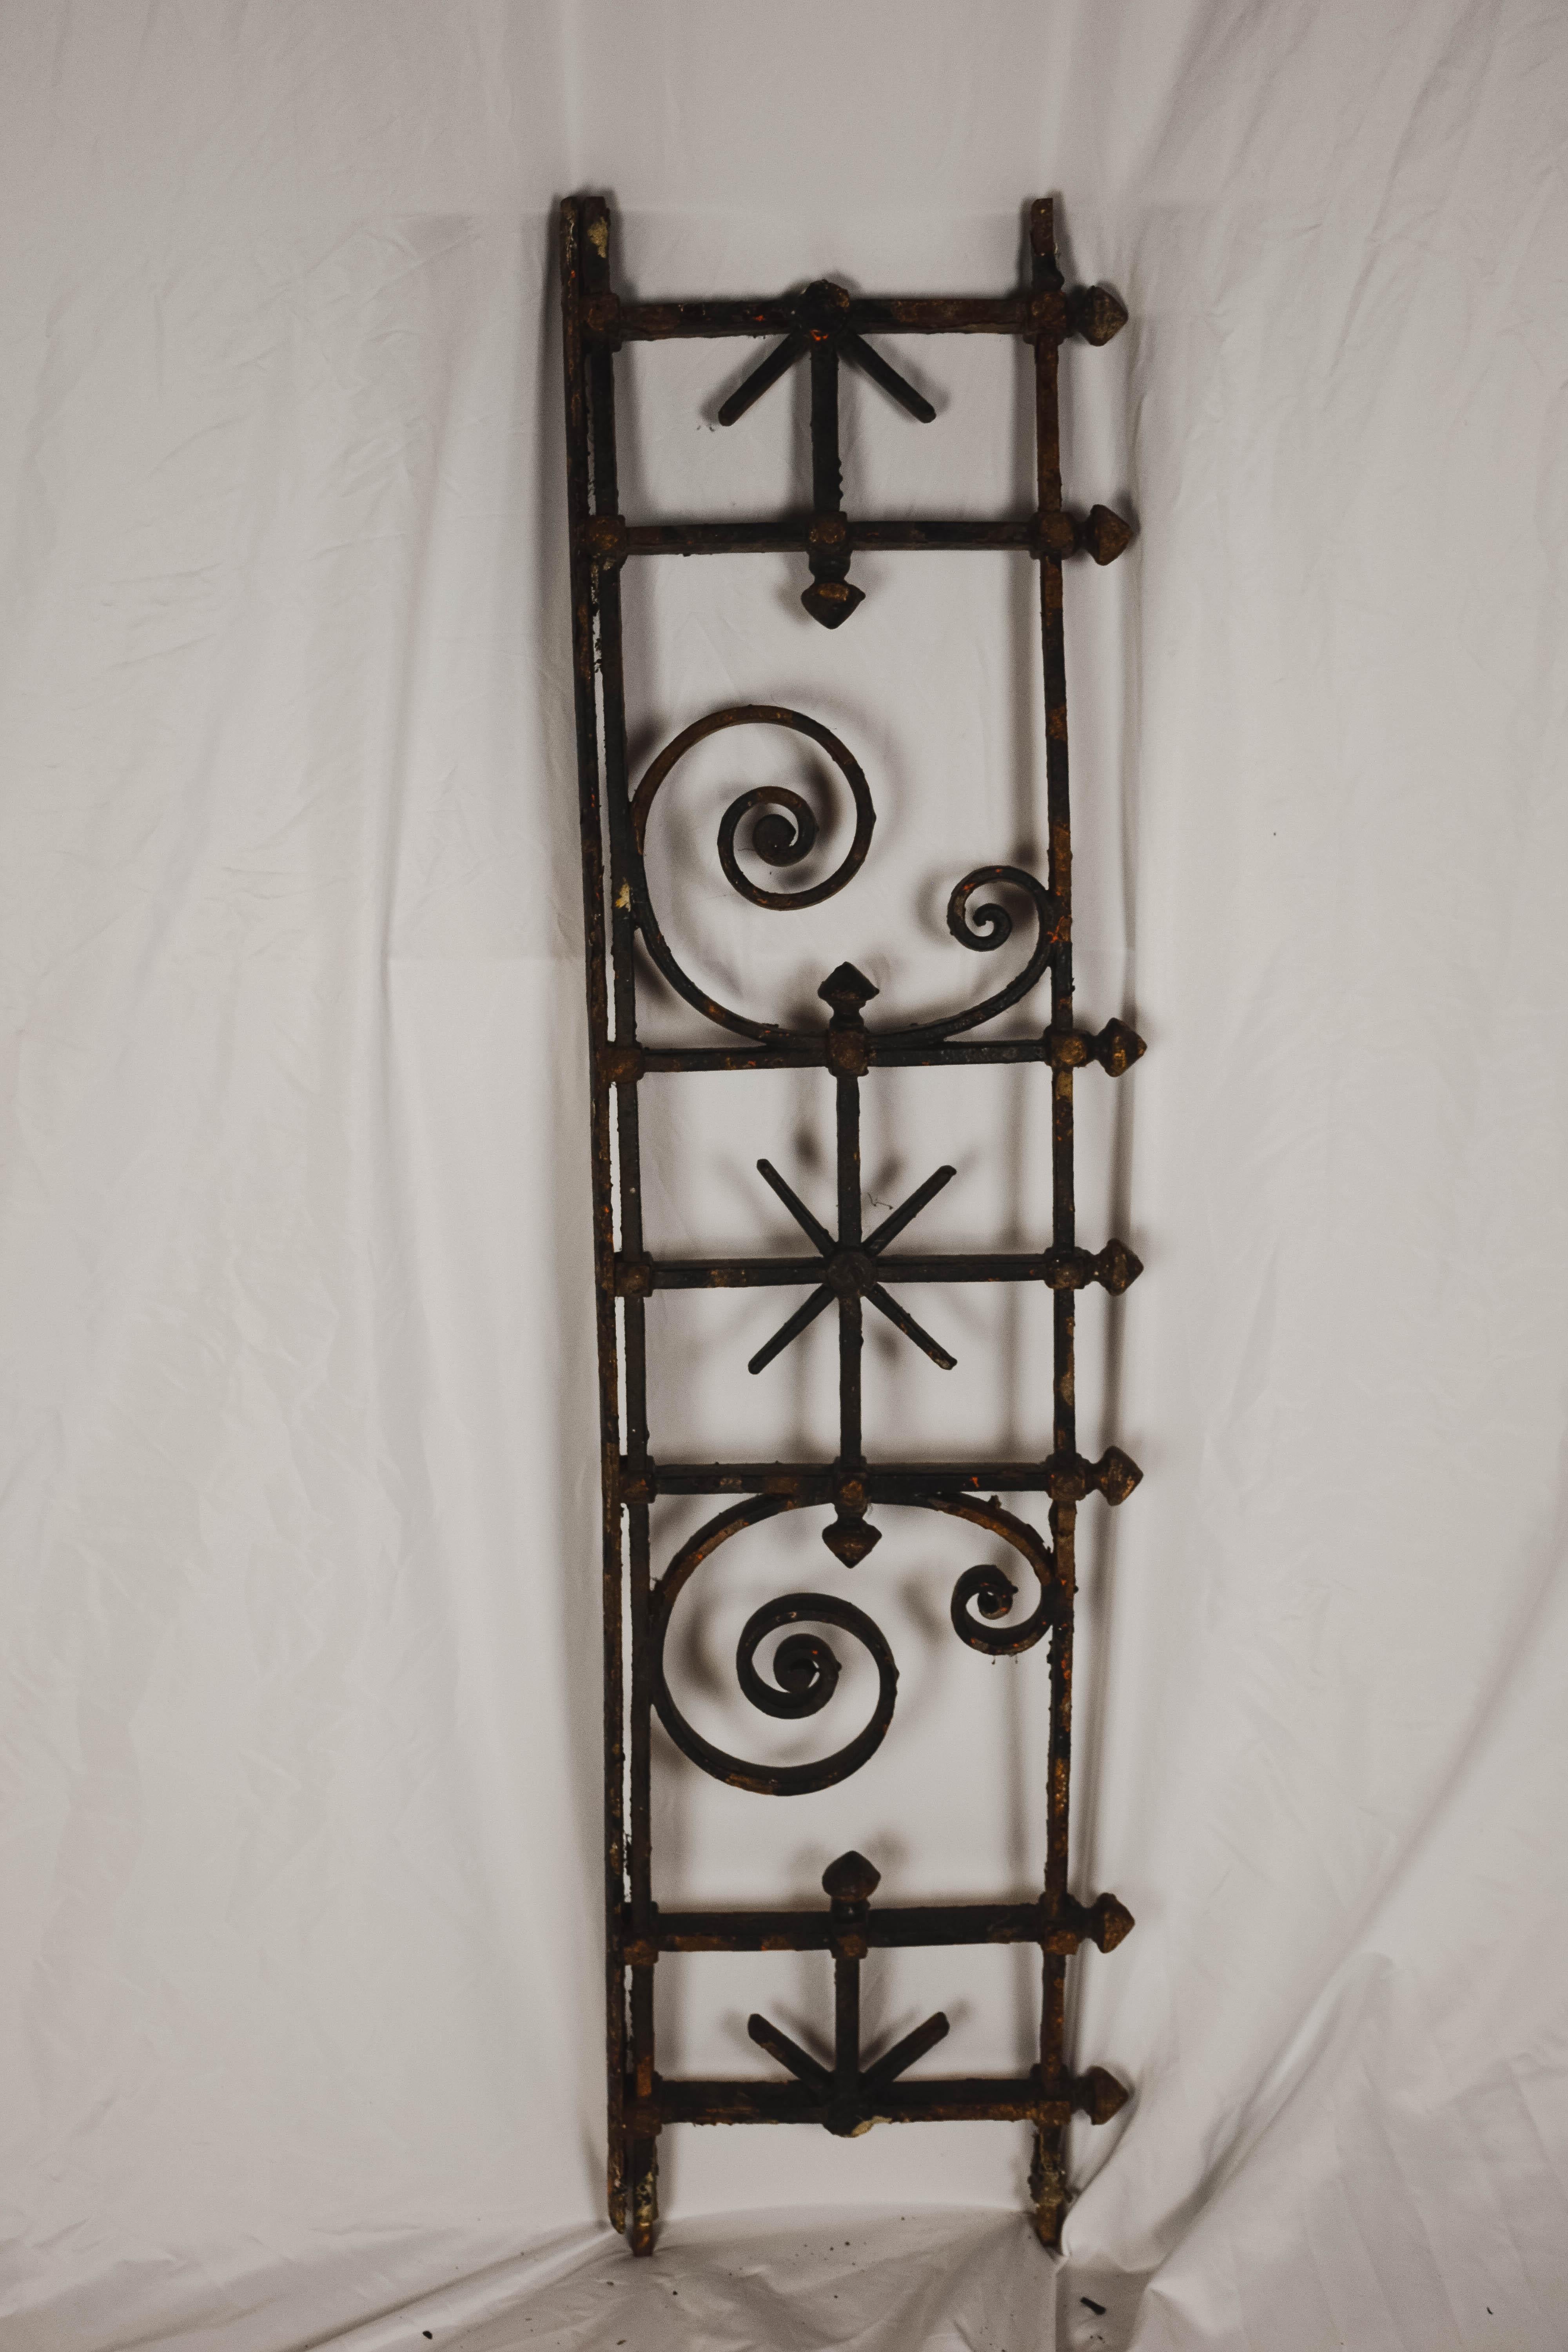 This beautiful handcrafted 19th century French iron architectural fragment was probably once a piece from a balcony or fence. Would be wonderful repurposed as a console or simply hanging on the wall.